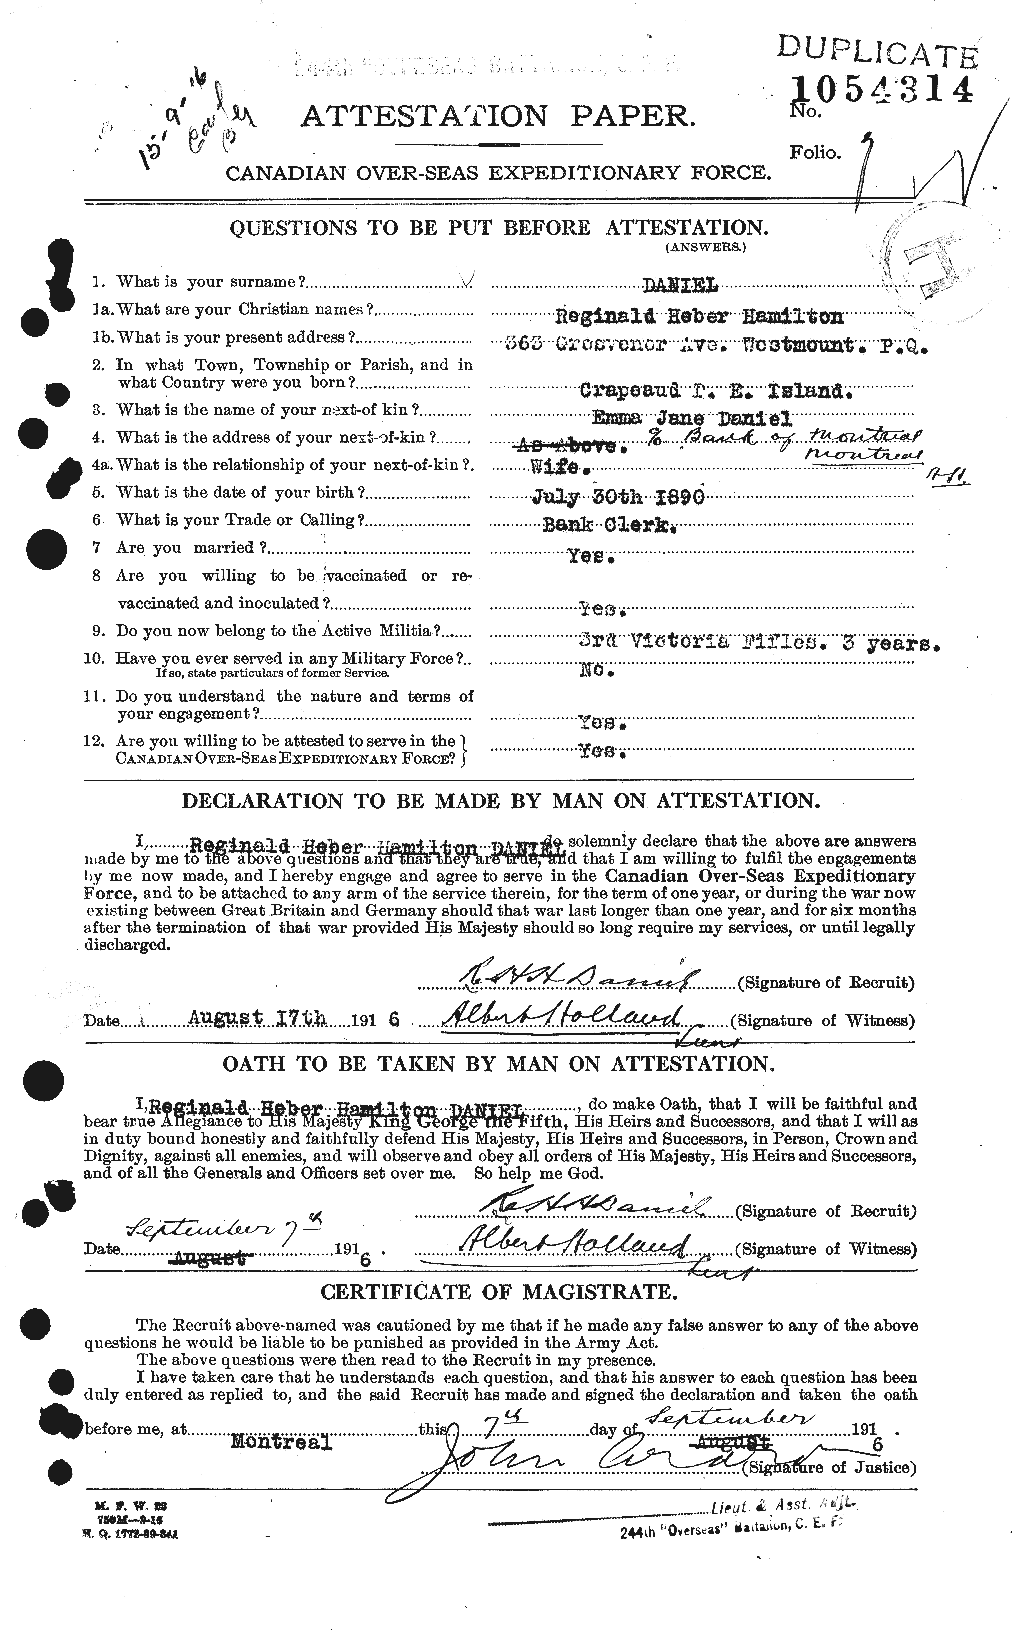 Personnel Records of the First World War - CEF 278048a